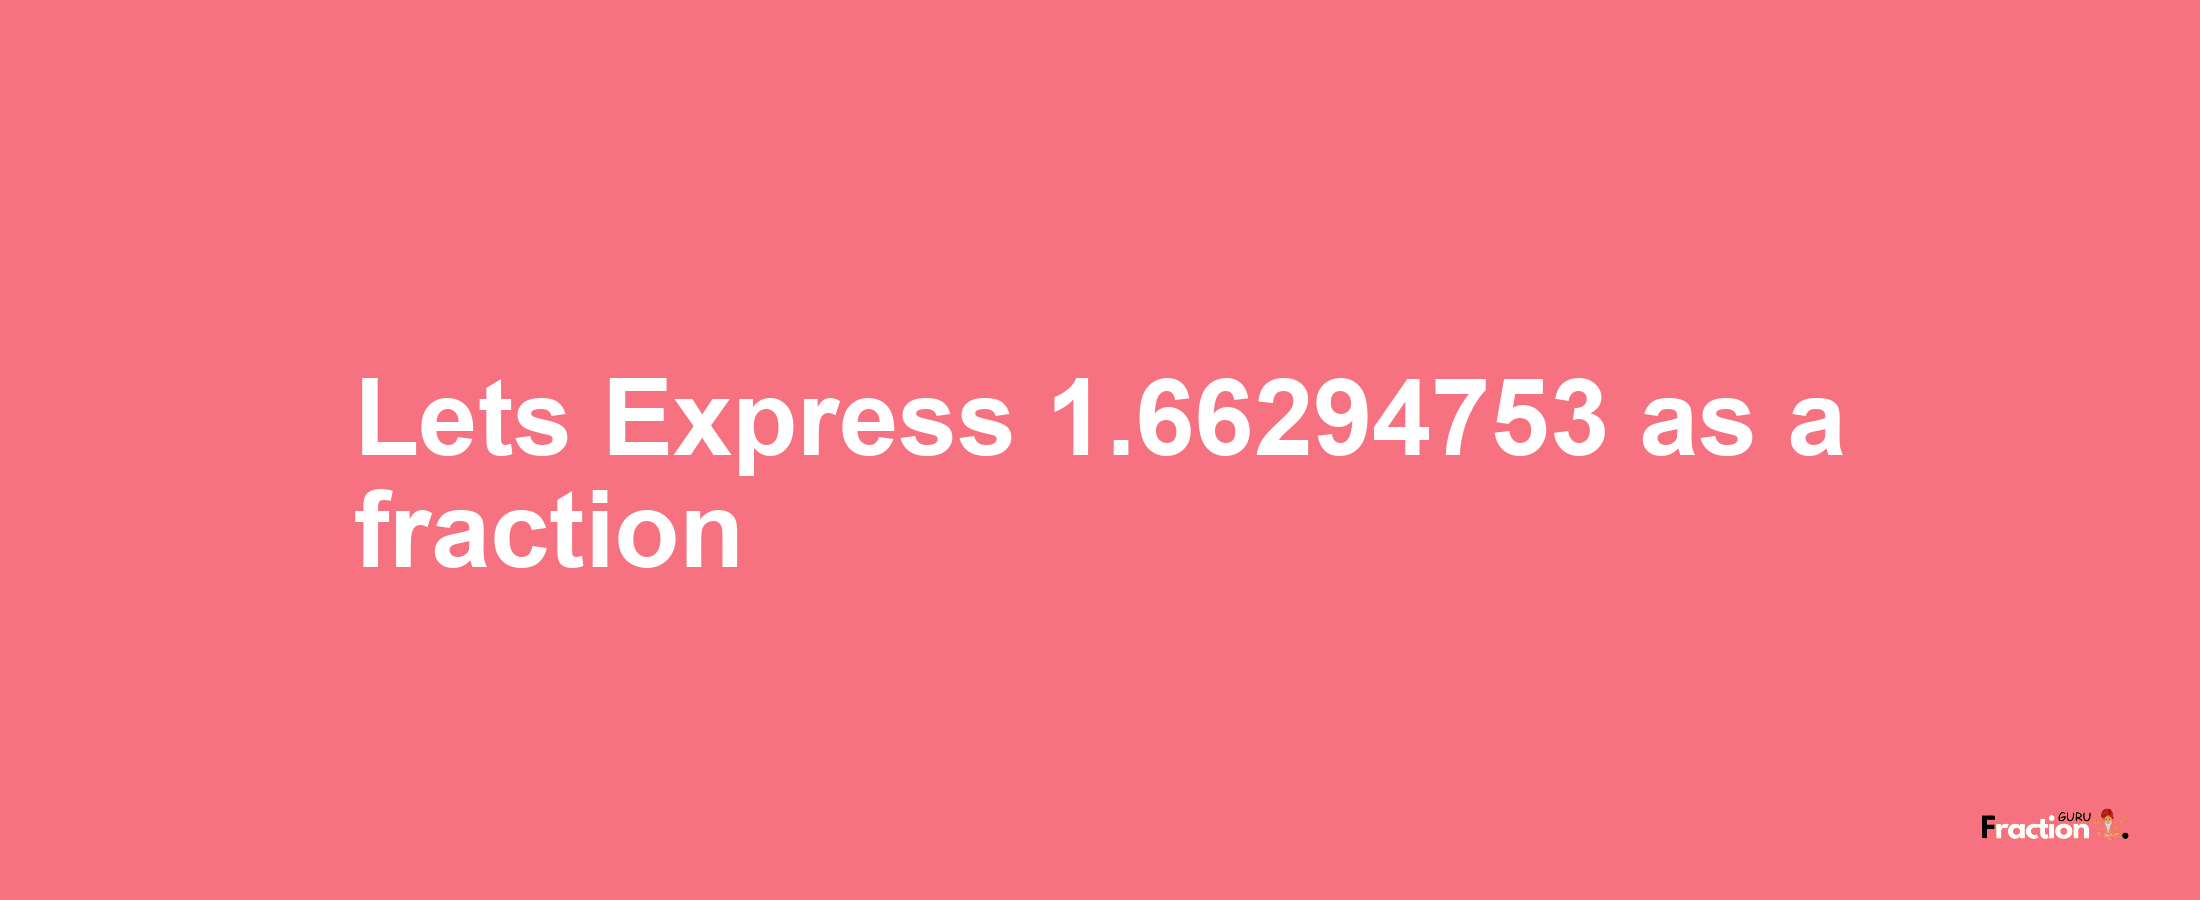 Lets Express 1.66294753 as afraction